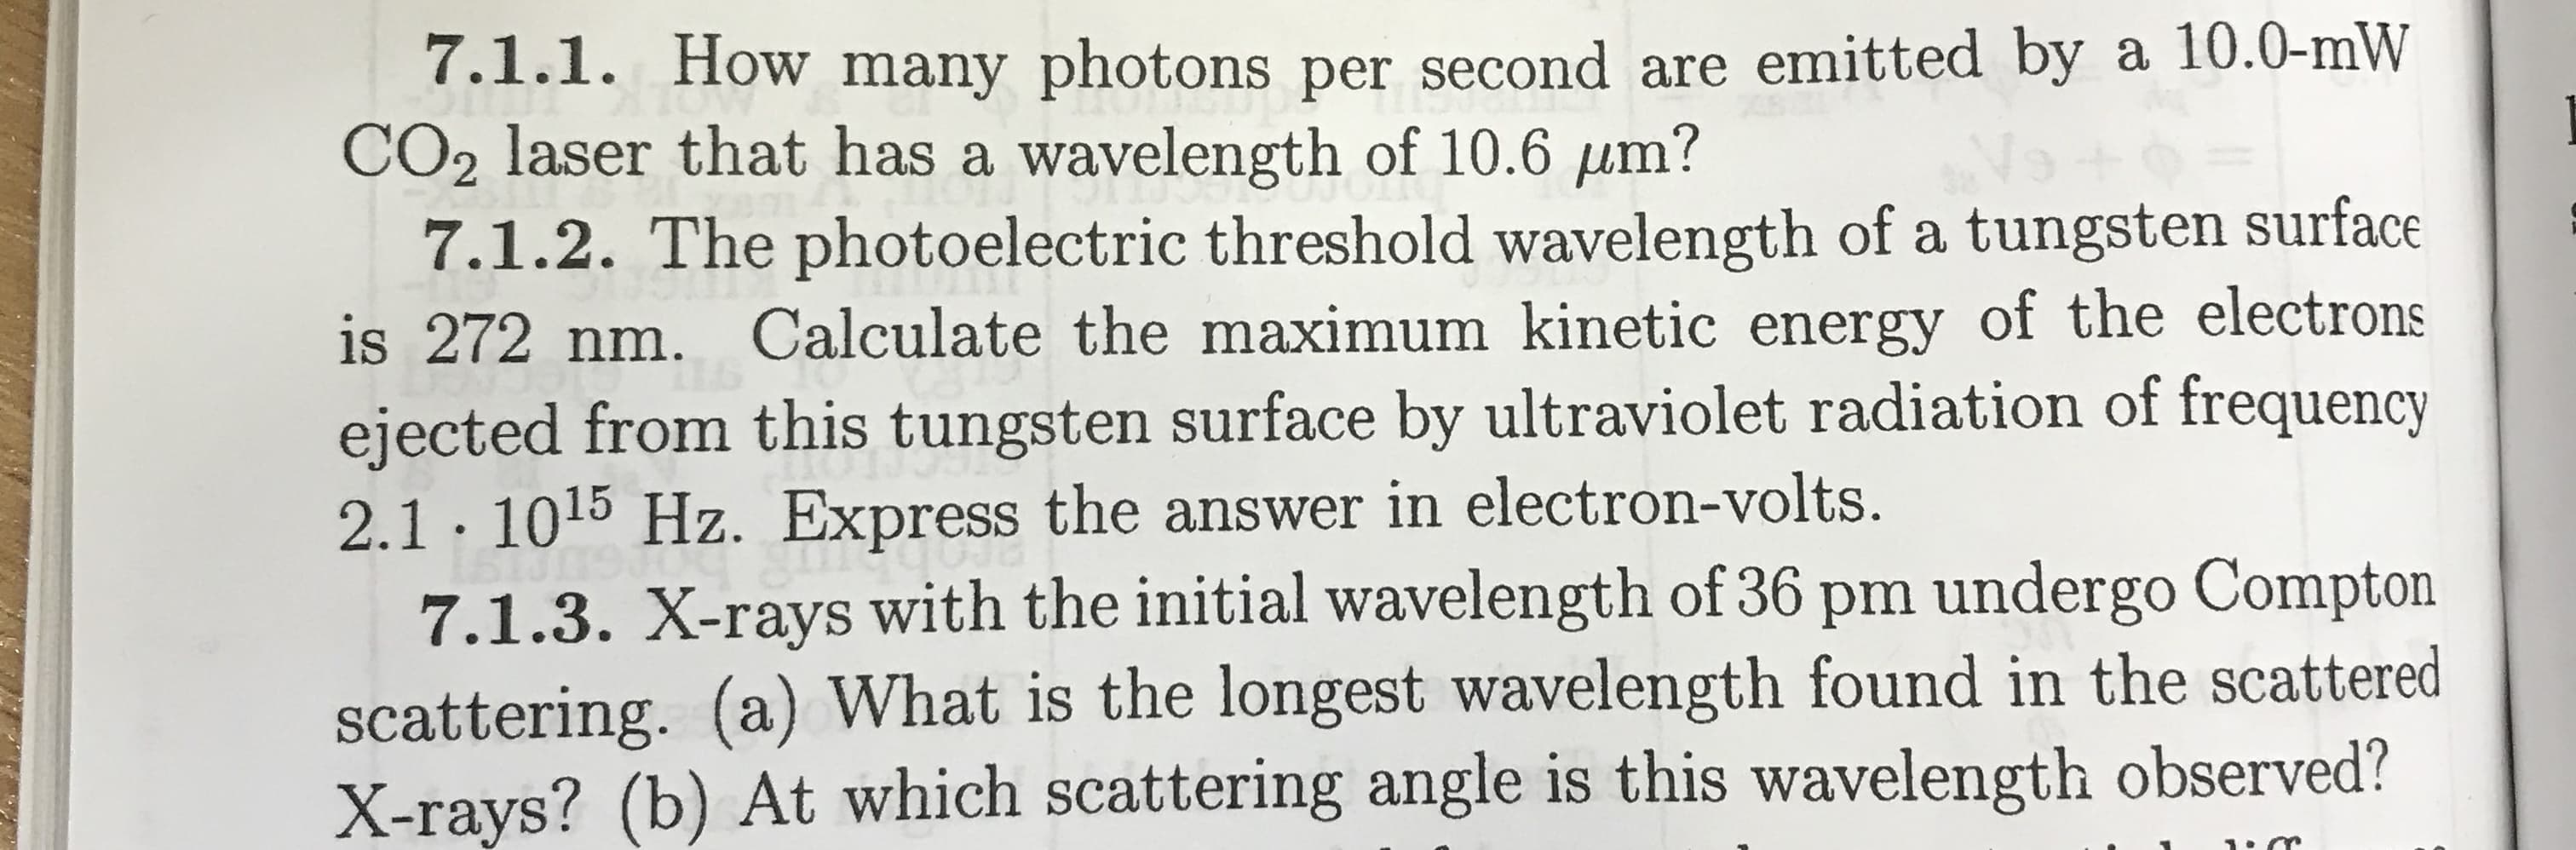 7.1.1. How many photons per second are emitted by a 10.0-mW
CO2 laser that has a wavelength of 10.6 µm?
7.1.2. The photoelectric threshold wavelength of a tungsten surface
is 272 nm. Calculate the maximum kinetic energy of the electrons
ejected from this tungsten surface by ultraviolet radiation of frequency
2.1· 1015 Hz. Express the answer in electron-volts.
7.1.3. X-rays with the initial wavelength of 36 pm undergo Compton
scattering. (a) What is the longest wavelength found in the scattered
X-rays? (b) At which scattering angle is this wavelength observed?
